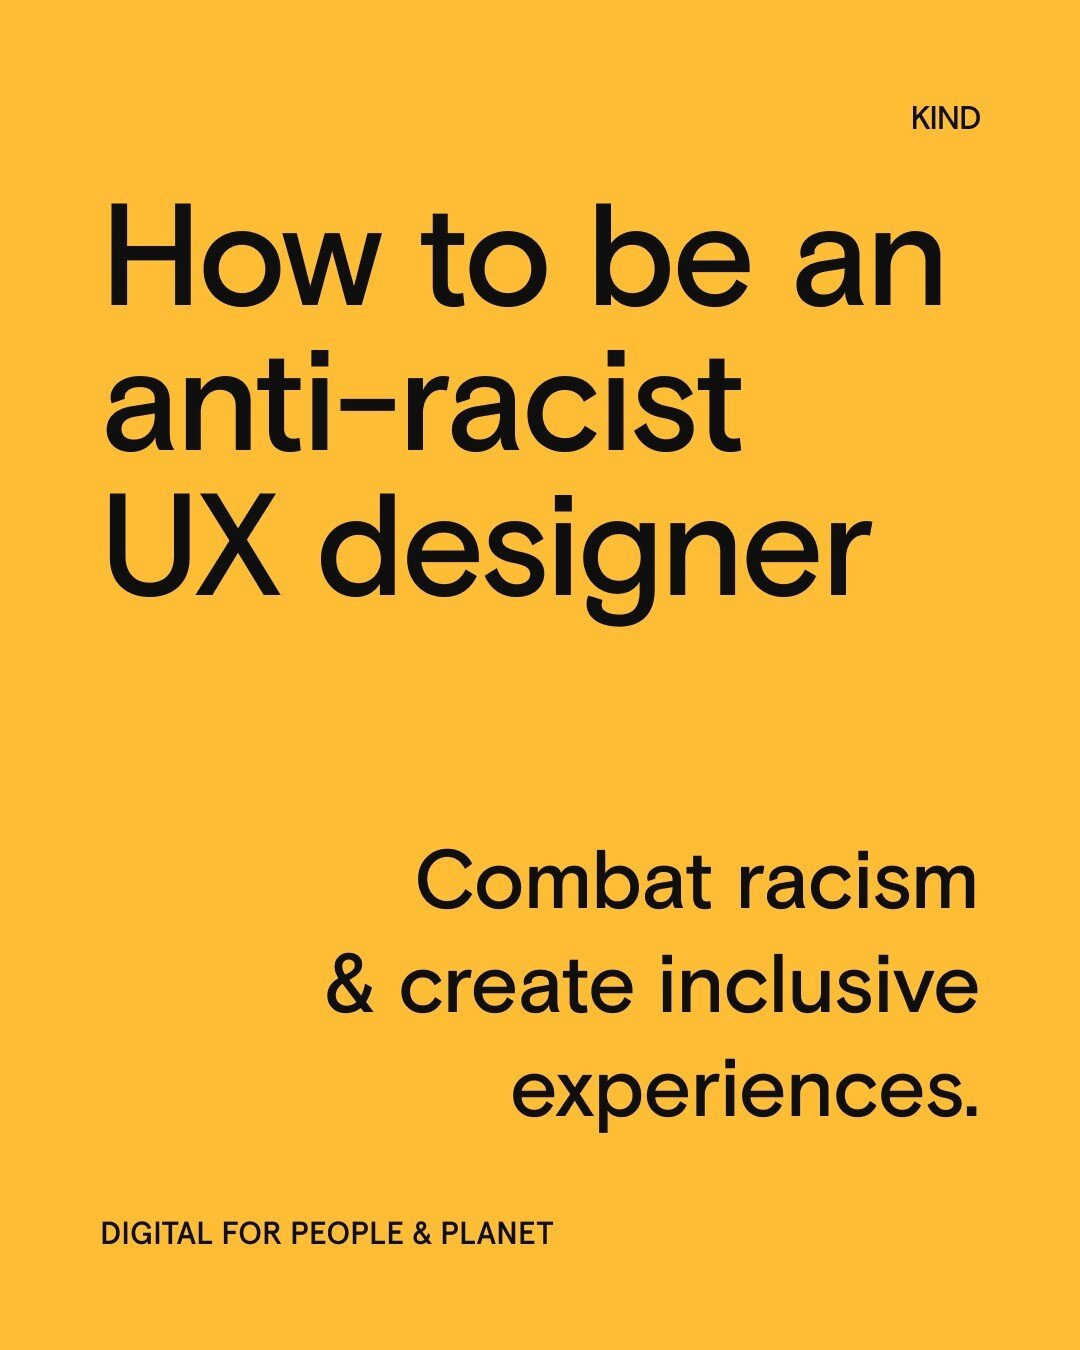 As UX designers, it's our responsibility to advocate for inclusion and diversity. 

Speak up and use your voice to push for change within your organisation and the design community. Together, we can create a more inclusive and fair future.

Let me kn